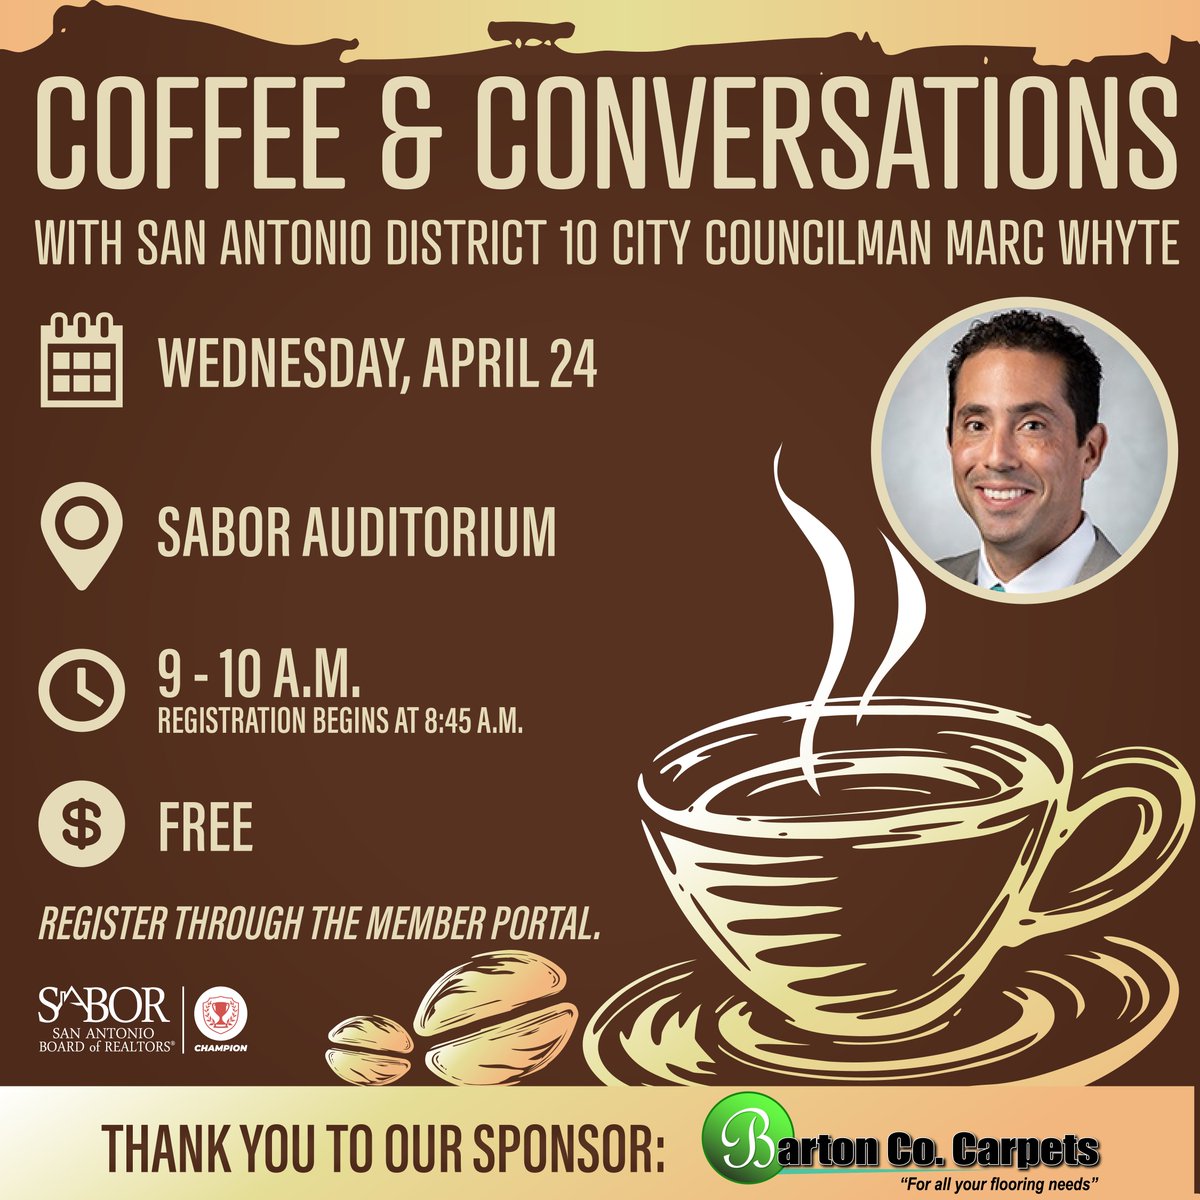 ☕️ Join us for Coffee & Conversations with District 10 City Councilman Marc Whyte on Wednesday, April 24. This is a great opportunity to network and meet your city councilmember while delving into local issues affecting the real estate industry. bit.ly/3TEiOWx